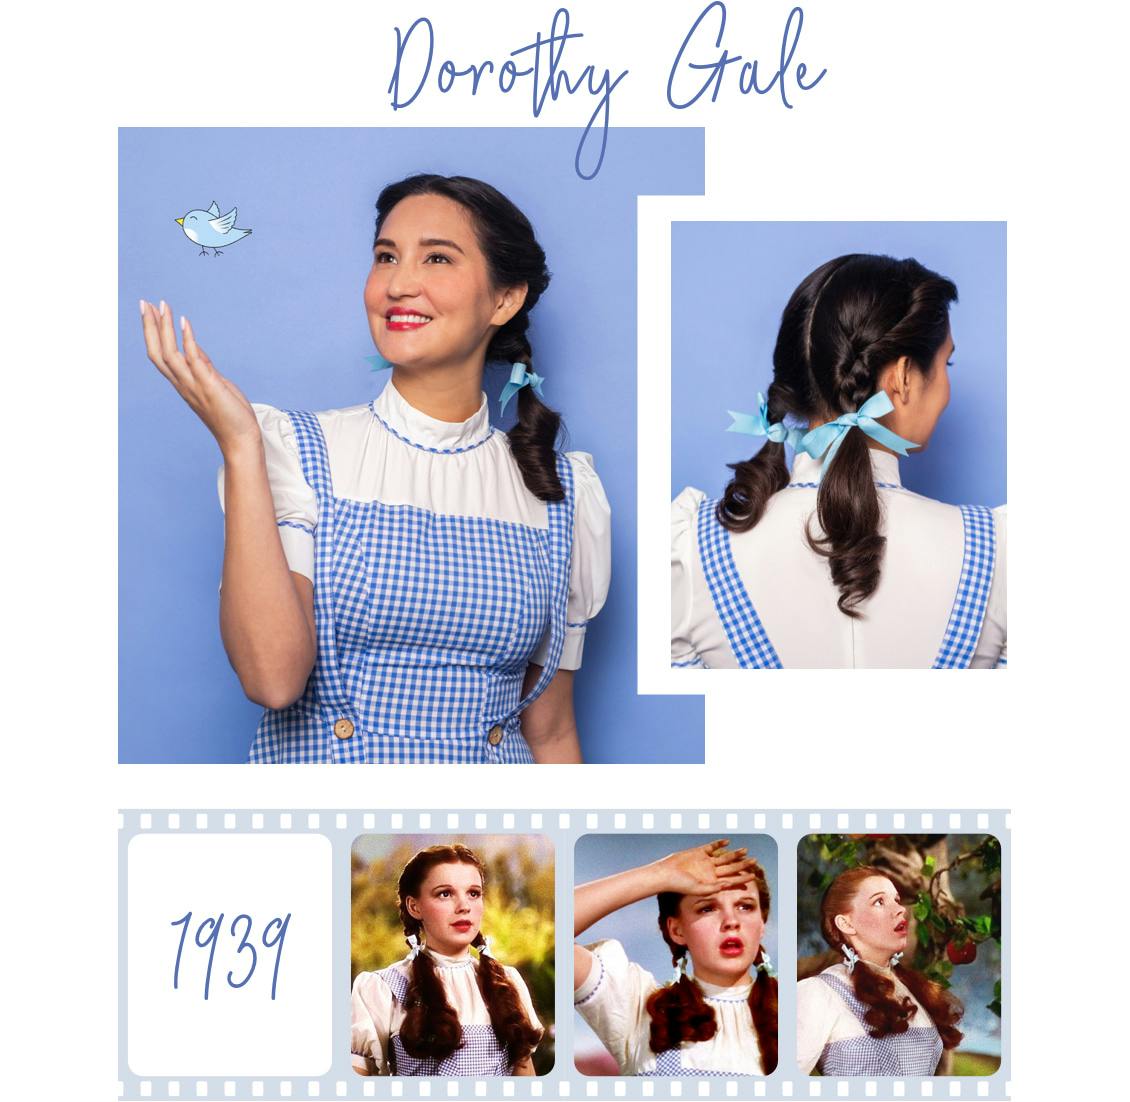 Image of esalon employee as dorothy gale from the wizard of oz with dark brunette hair color and pigtails with collage of original actress image below from 1939